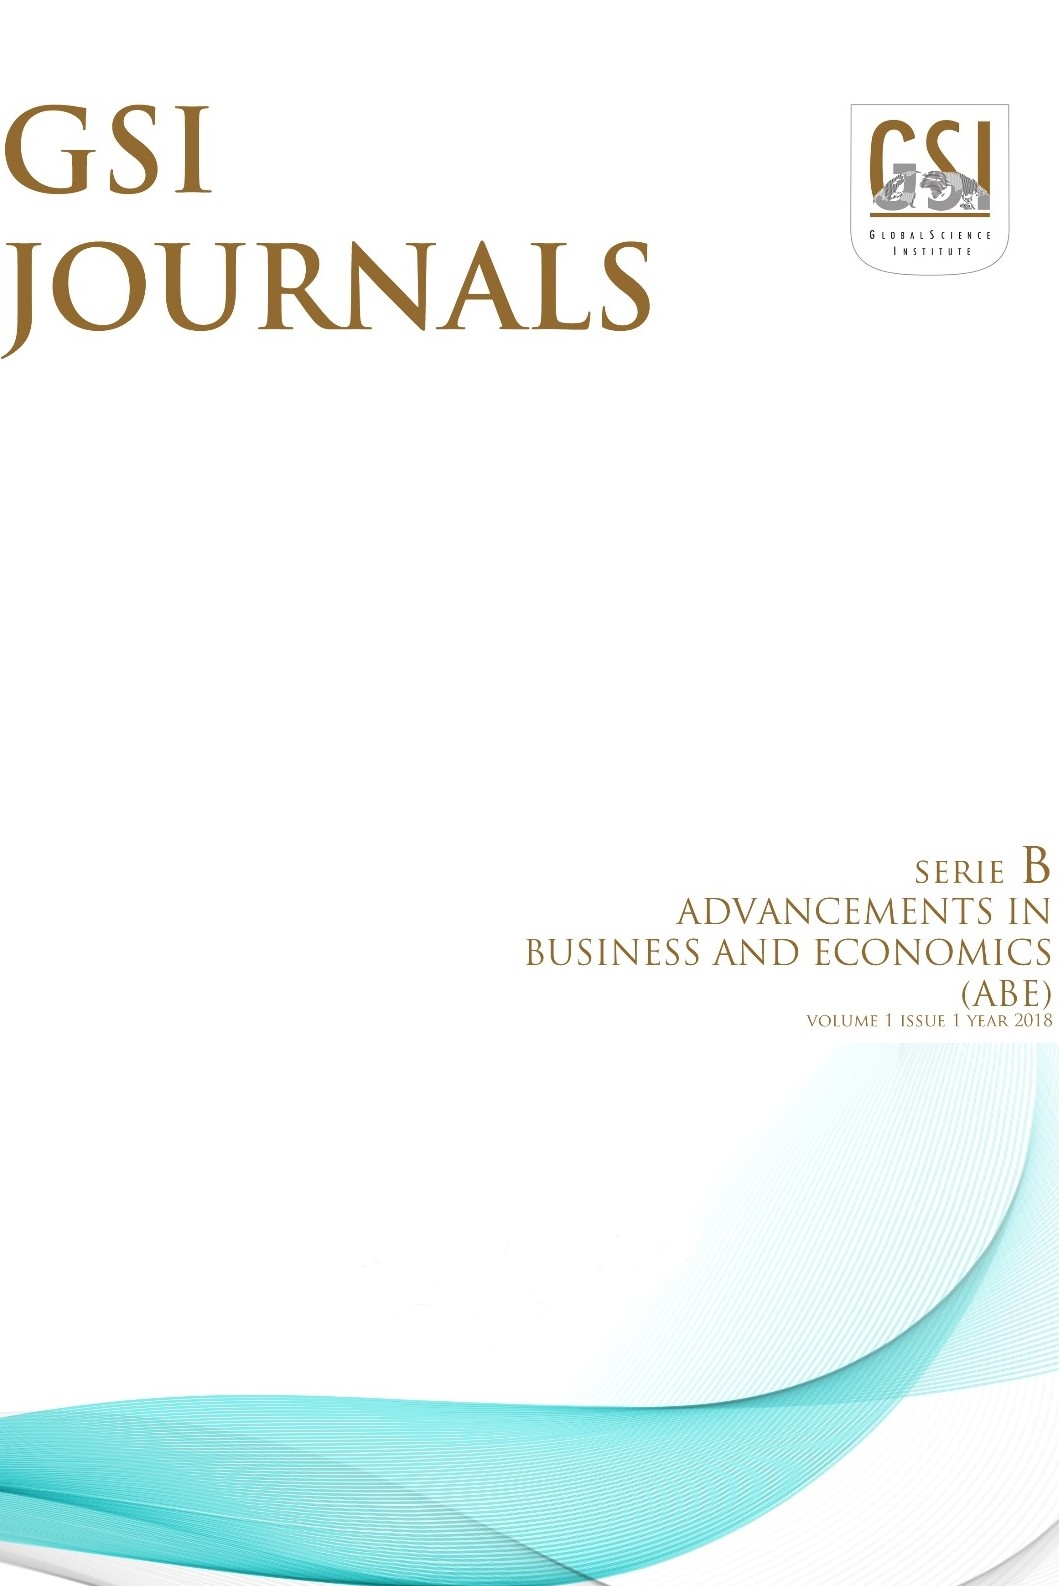 GSI Journals Serie B: Advancements in Business and Economics